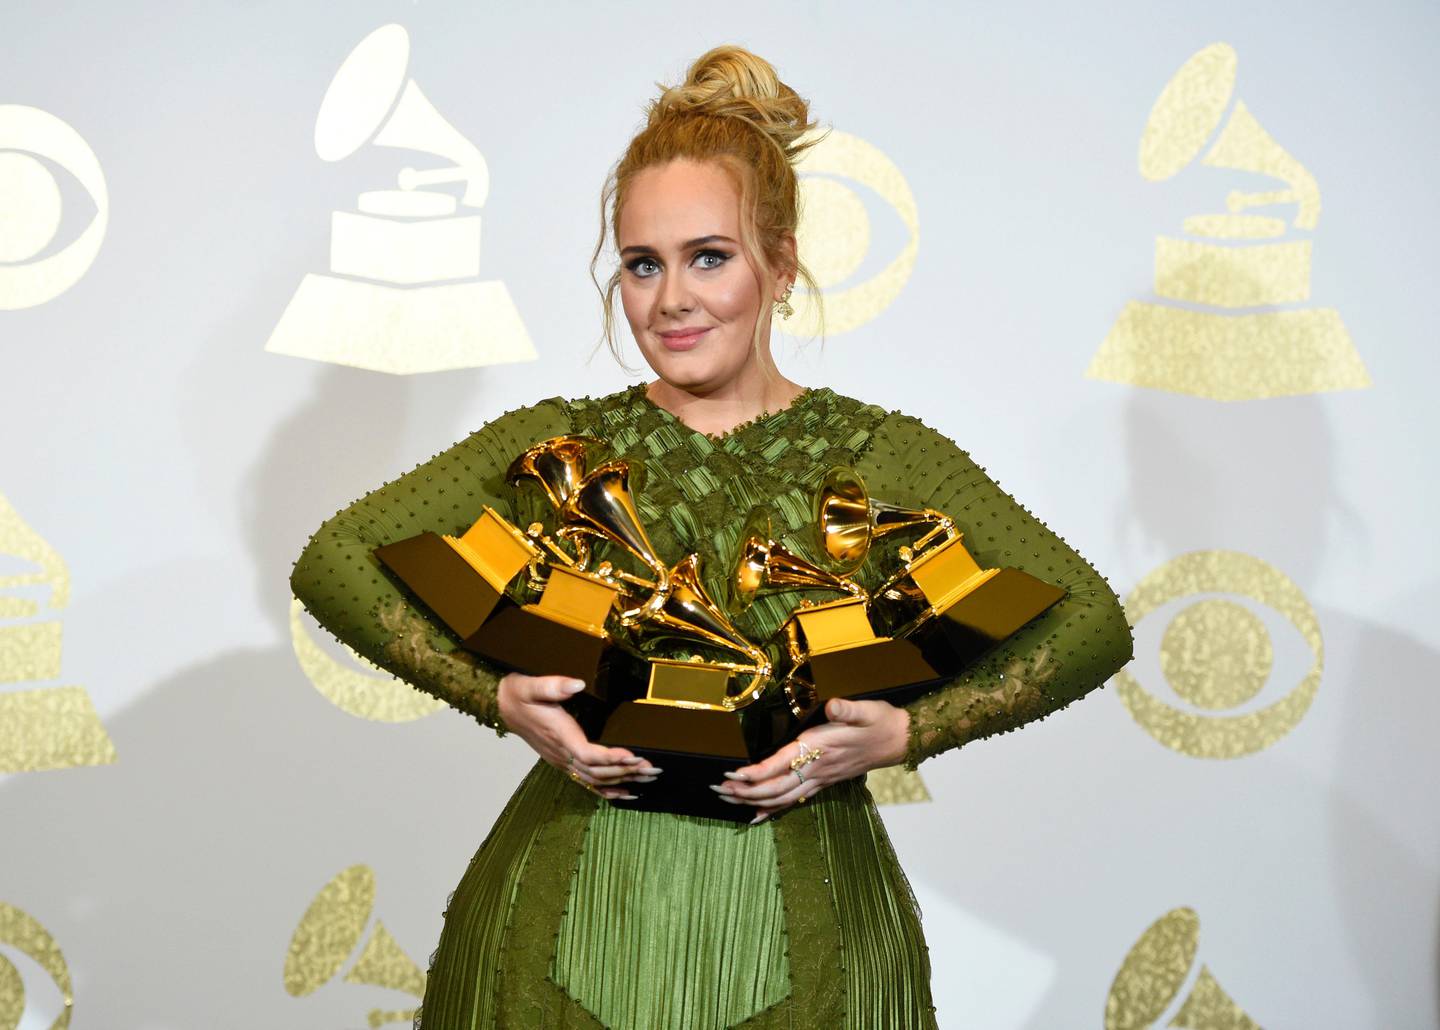 Adele poses in the press room with the awards for album of the year for "25", song of the year for "Hello", record of the year for "Hello", best pop solo performance for "Hello", and best pop vocal album for "25" at the 59th annual Grammy Awards at the Staples Center on Sunday, Feb. 12, 2017, in Los Angeles. (Photo by Chris Pizzello/Invision/AP)